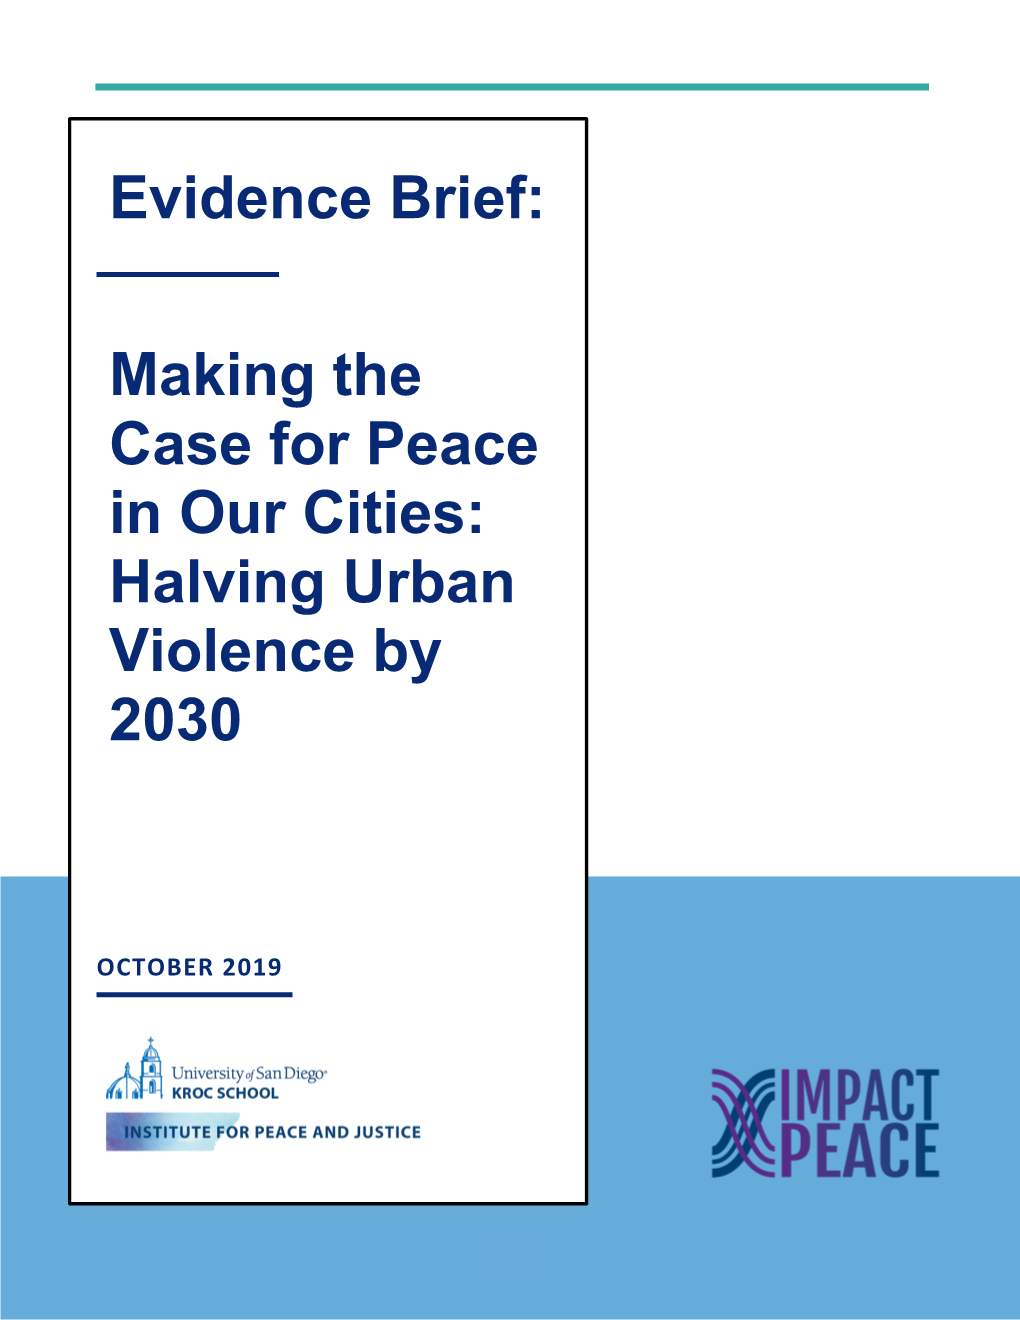 Making the Case for Peace in Our Cities: Halving Urban Violence by 2030